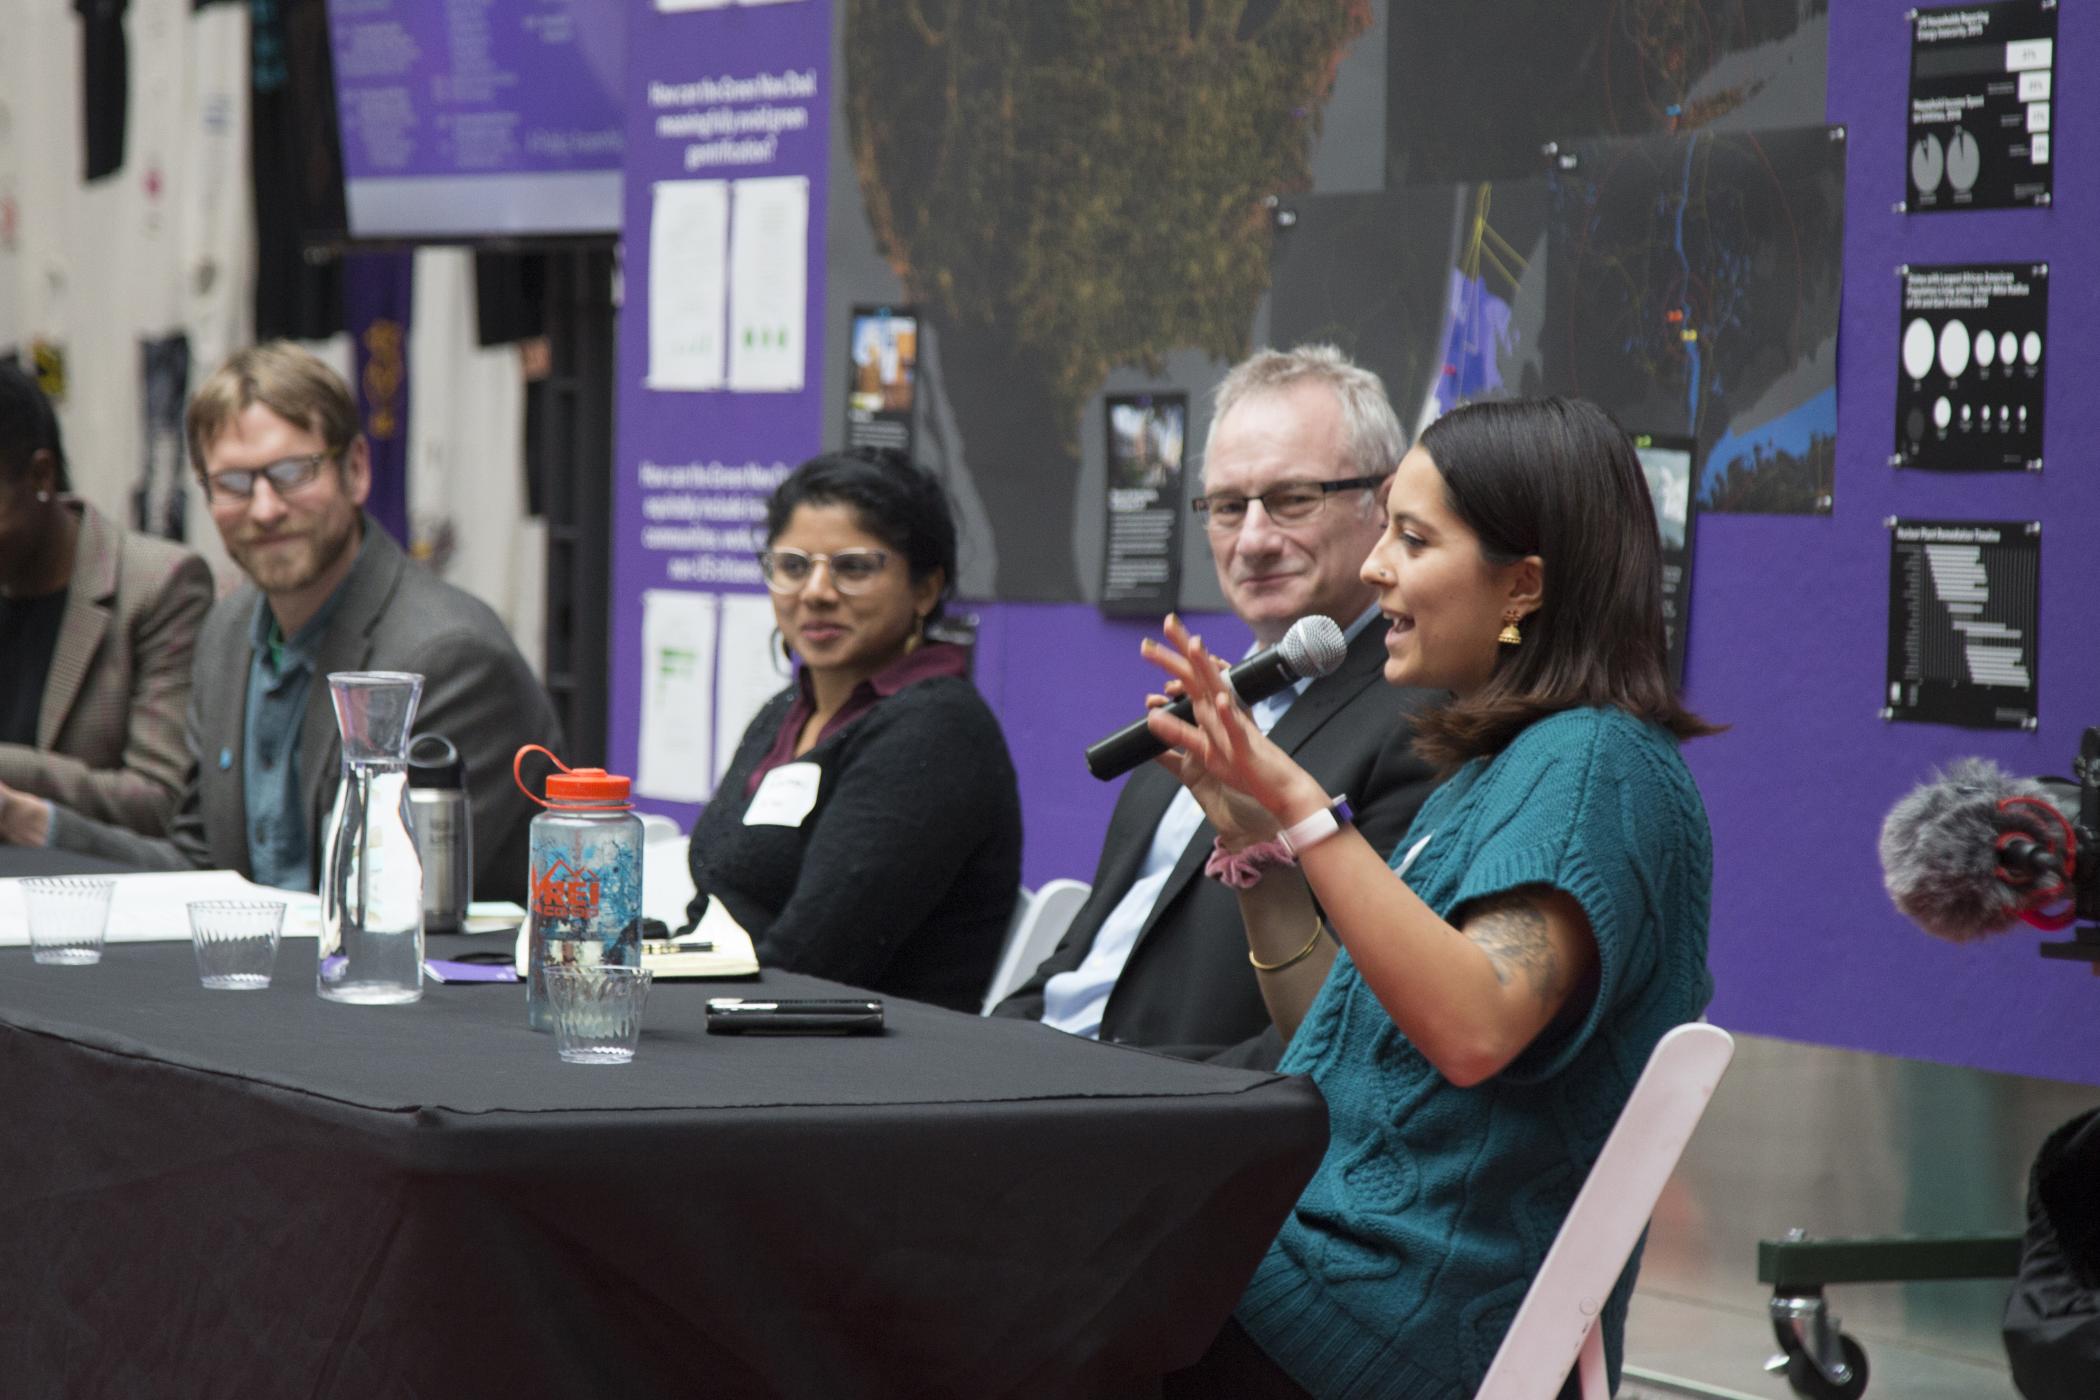 Priya Mulgaonkar gesticulates while holding a microphone sitting at a black table next to four other panelists during the "Energy and Power" discussion